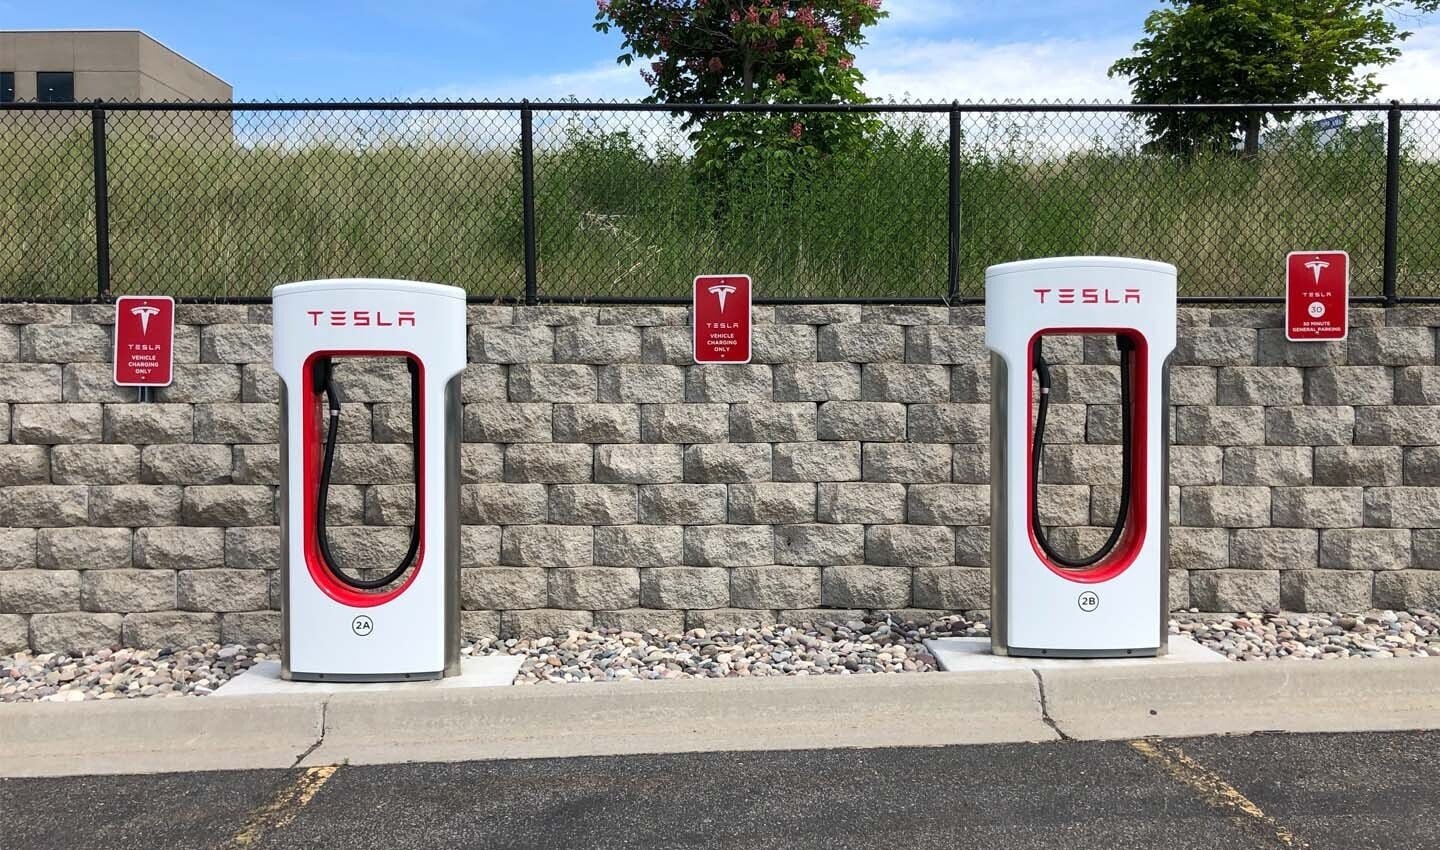 Tesla has opened its Supercharger network for all EVs in the Netherlands.